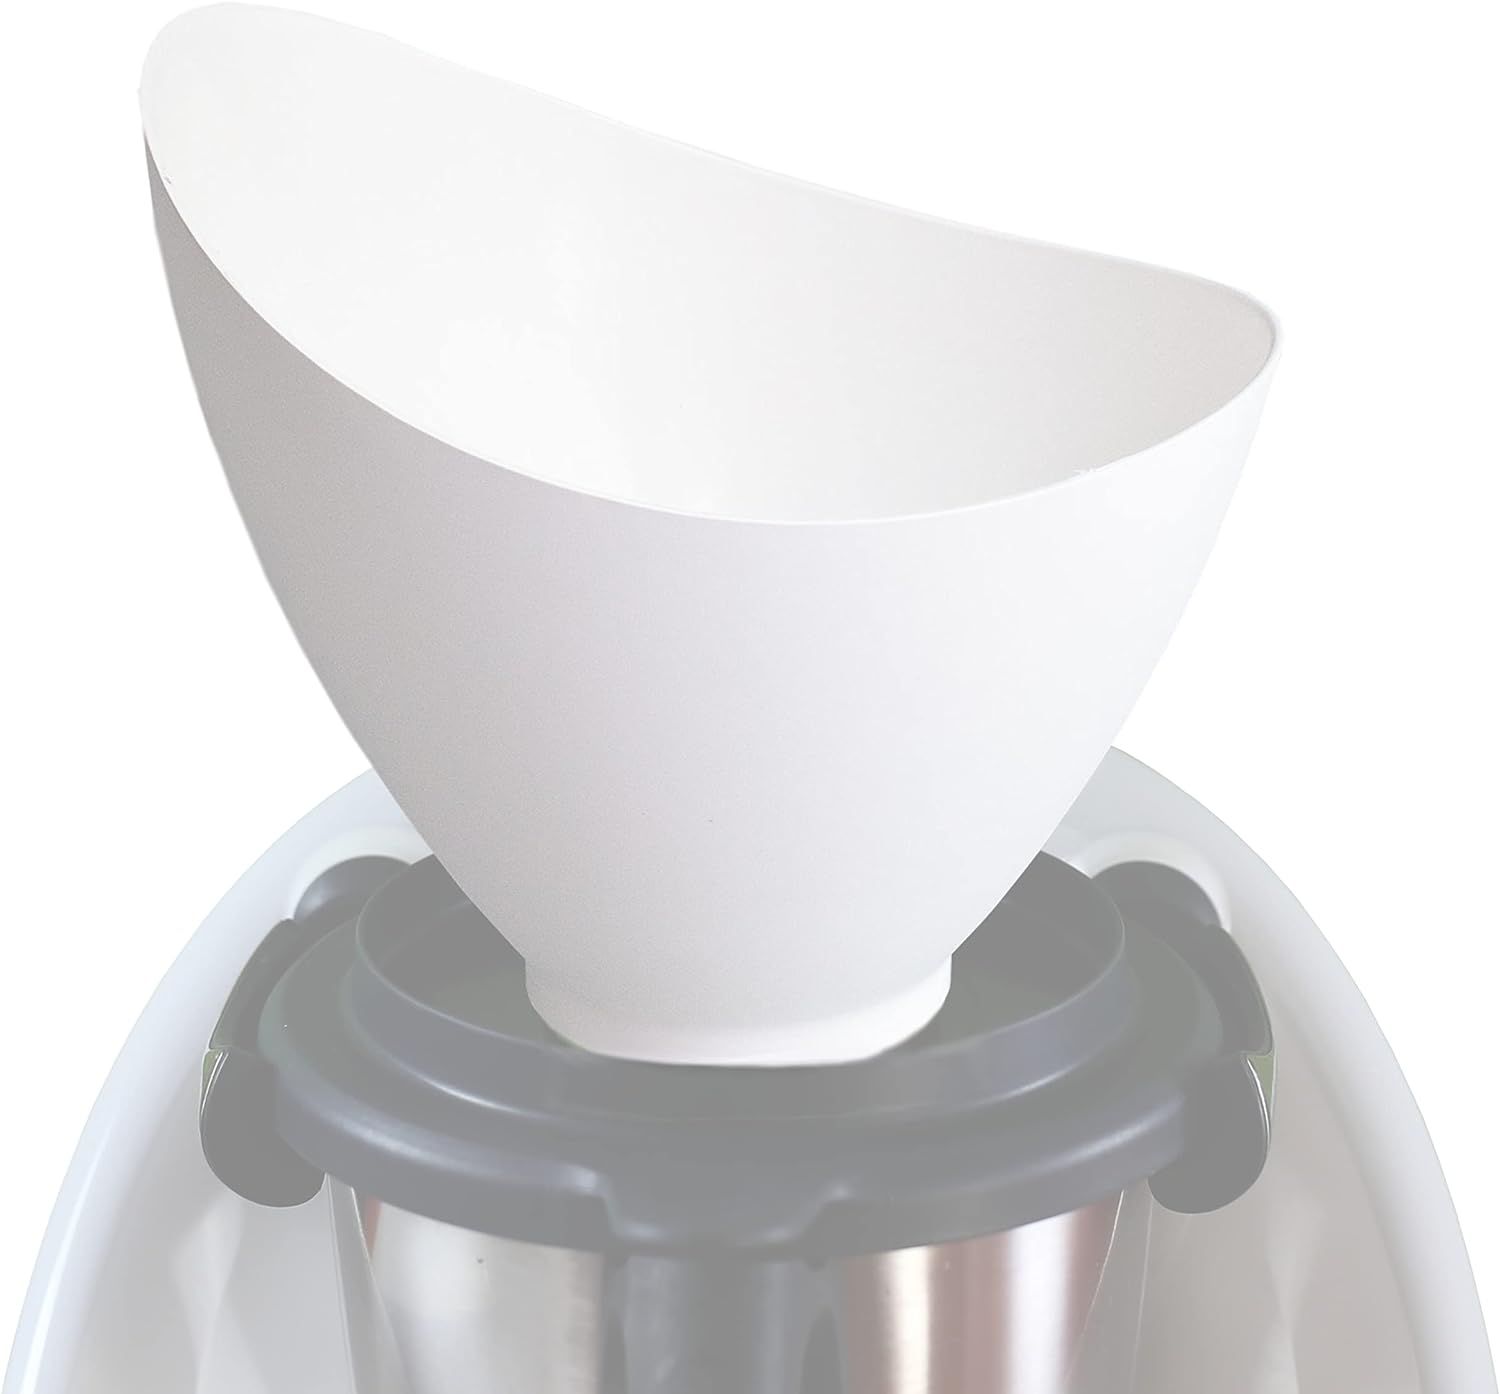 Madama Bimbuto - Funnel for Thermomix TM31, TM5 and TM6. Accessory for Thermomix Made of biomaterial for Food, Durable, Non-Toxic and BPA-Free. Made in Italy